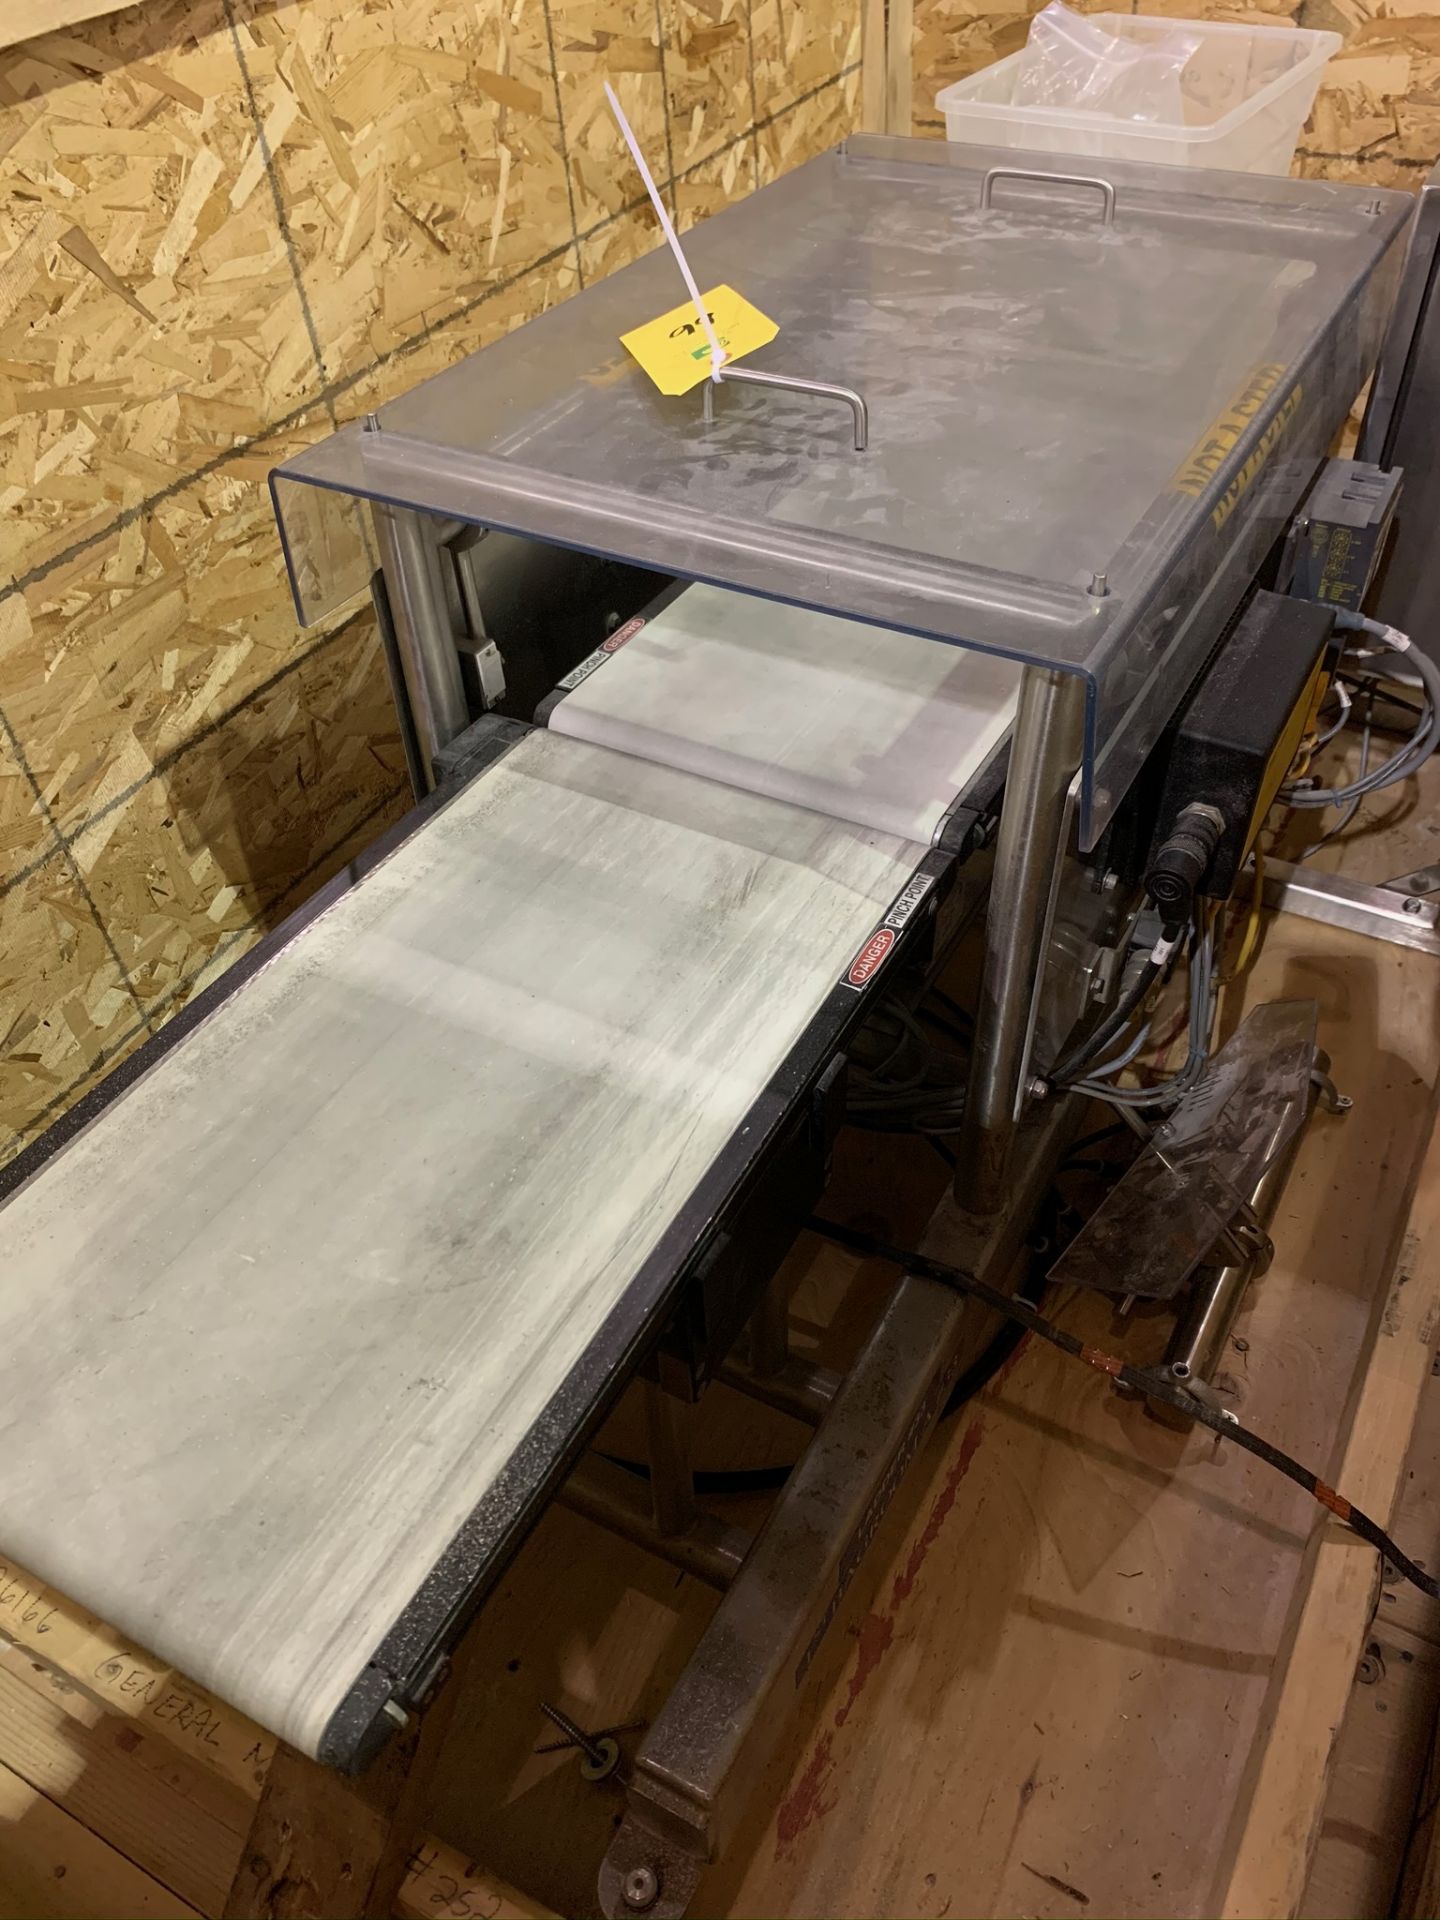 Speedee Inline Checkweigher S/N CW134 (Rigging Fee - $50) - Image 4 of 5